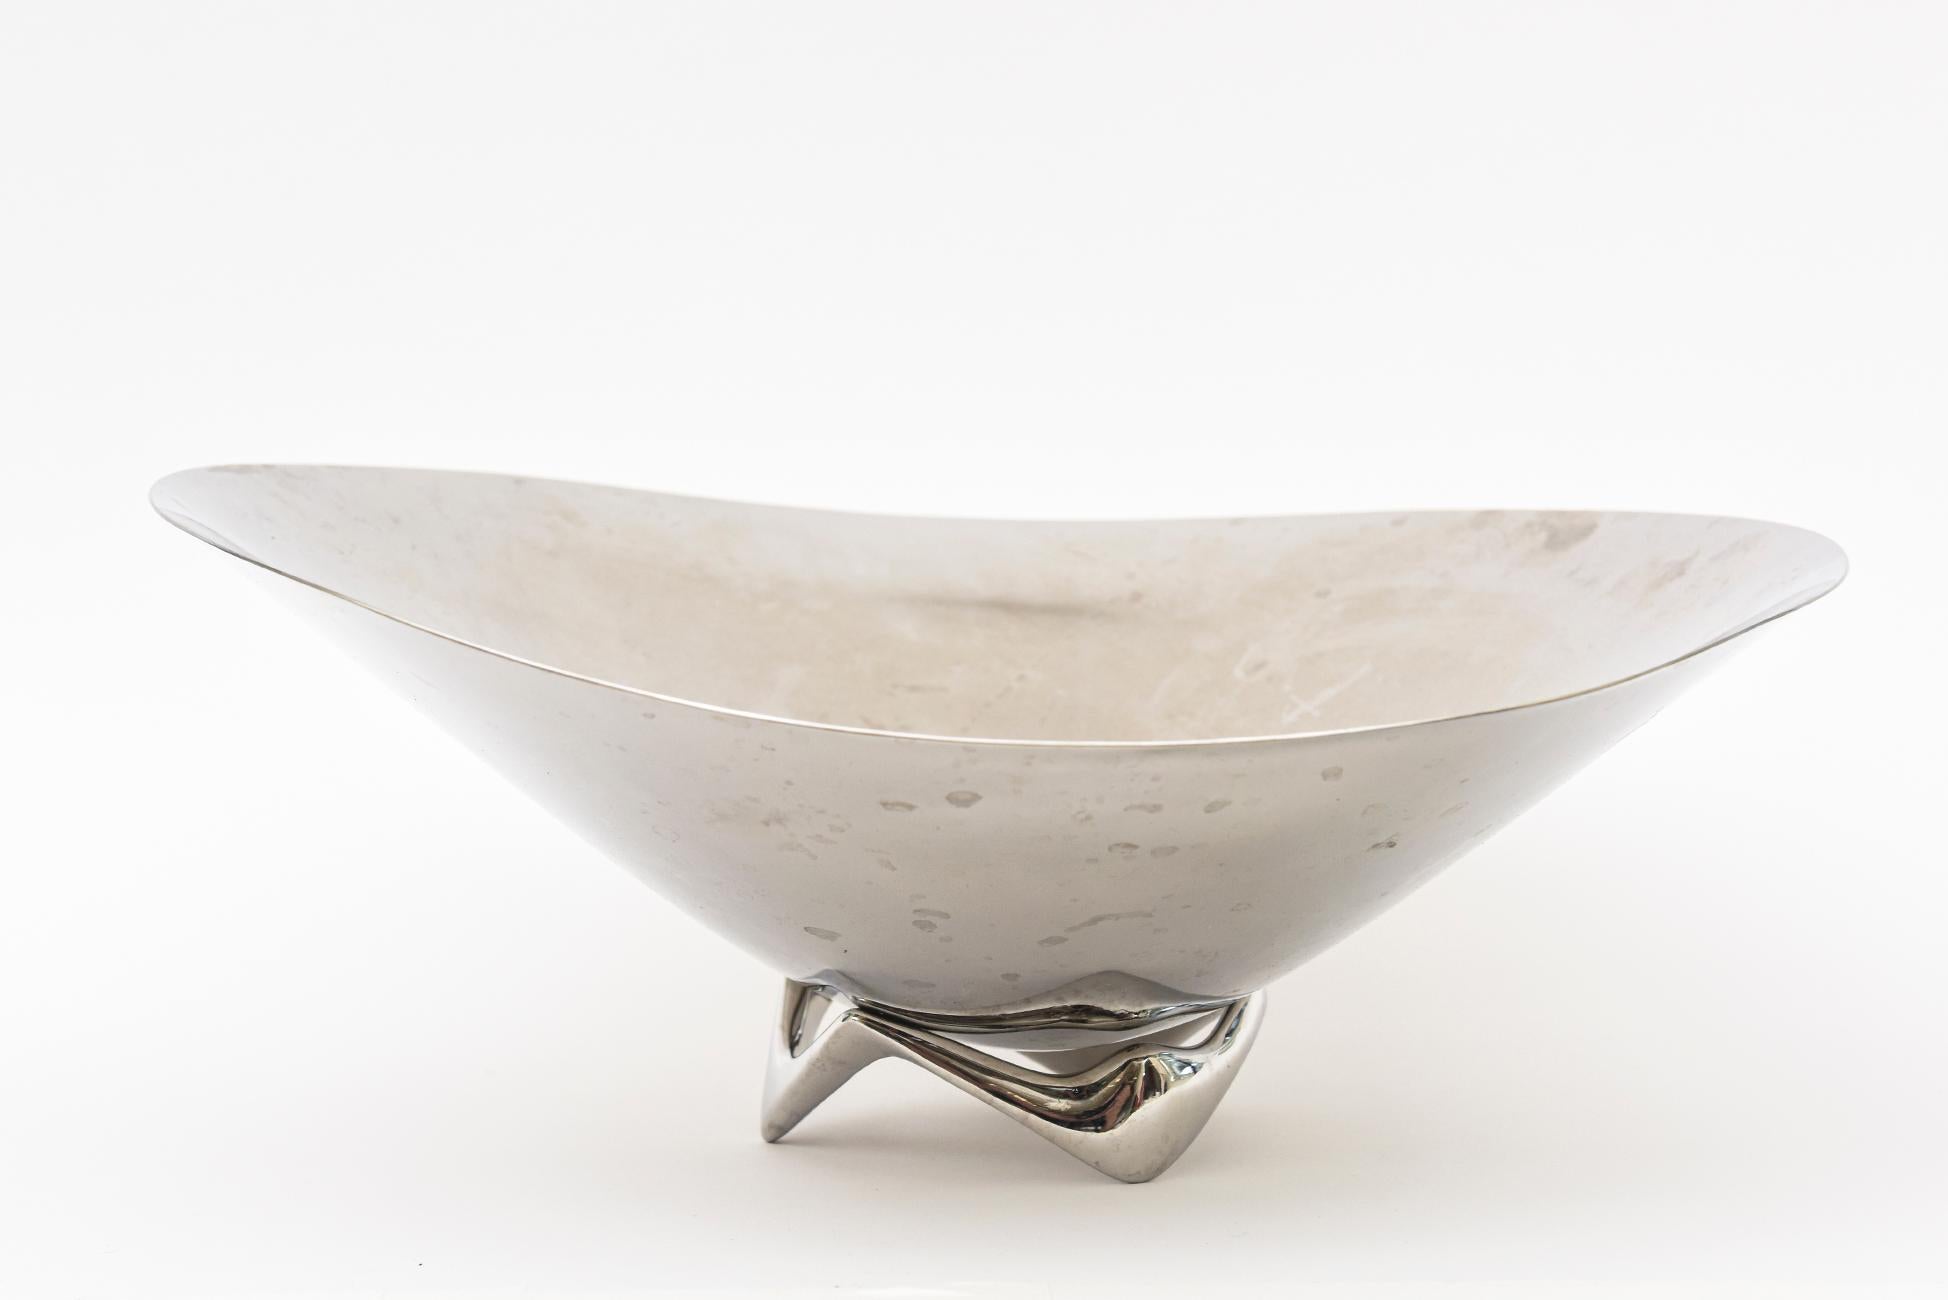 This large undulating hallmarked stainless steel polished organic modern bowl was designed by Henning Koppel for Georg Jensen in 2011. It is biomorphic in form and has a beautiful base of an interesting shape. Great for serving or just as. Good